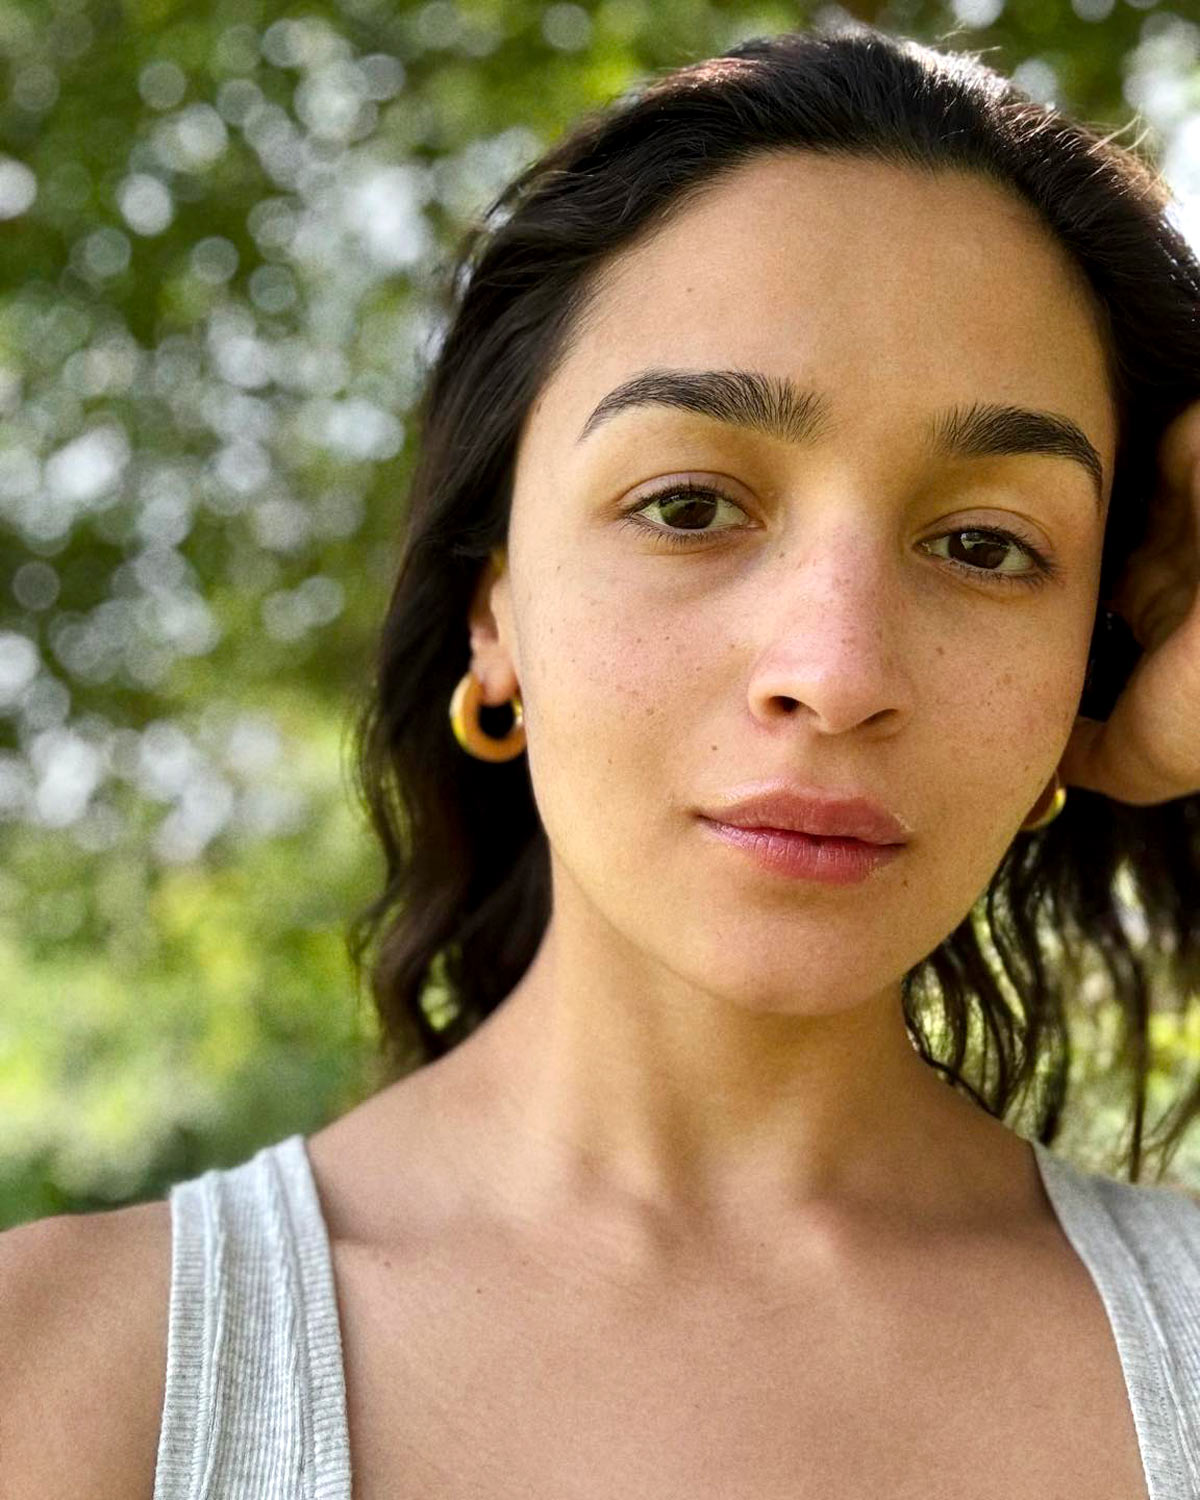 Who Looks Gorgeous Without Make-Up? VOTE!